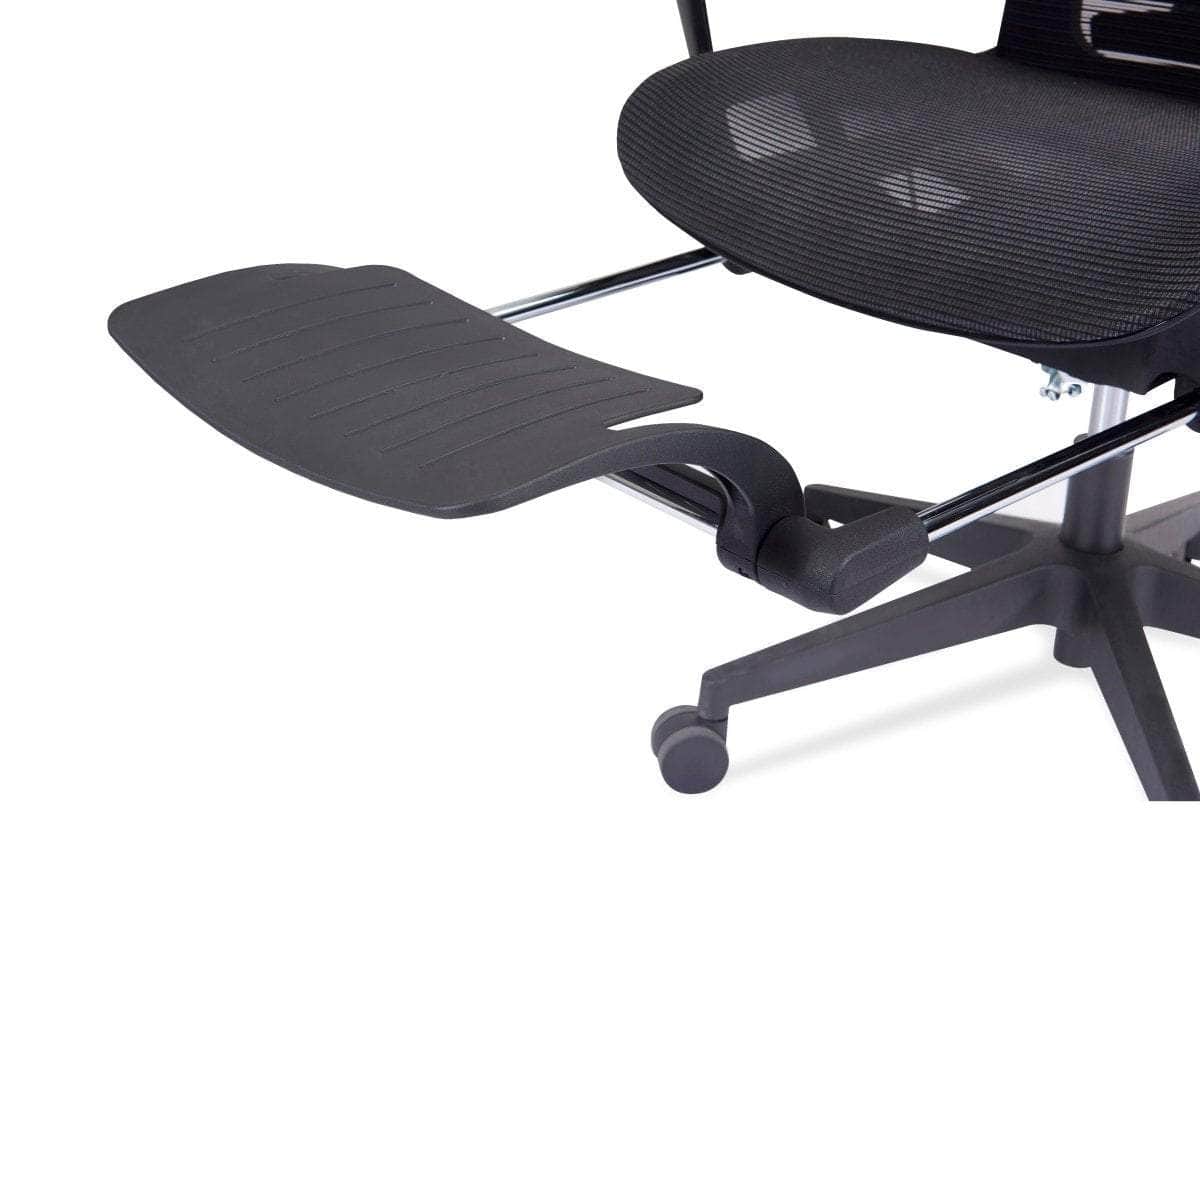 Egcx-K339L Ergonomic Office Chair Seat Adjustable Height Mesh Chair Back Support Footrest